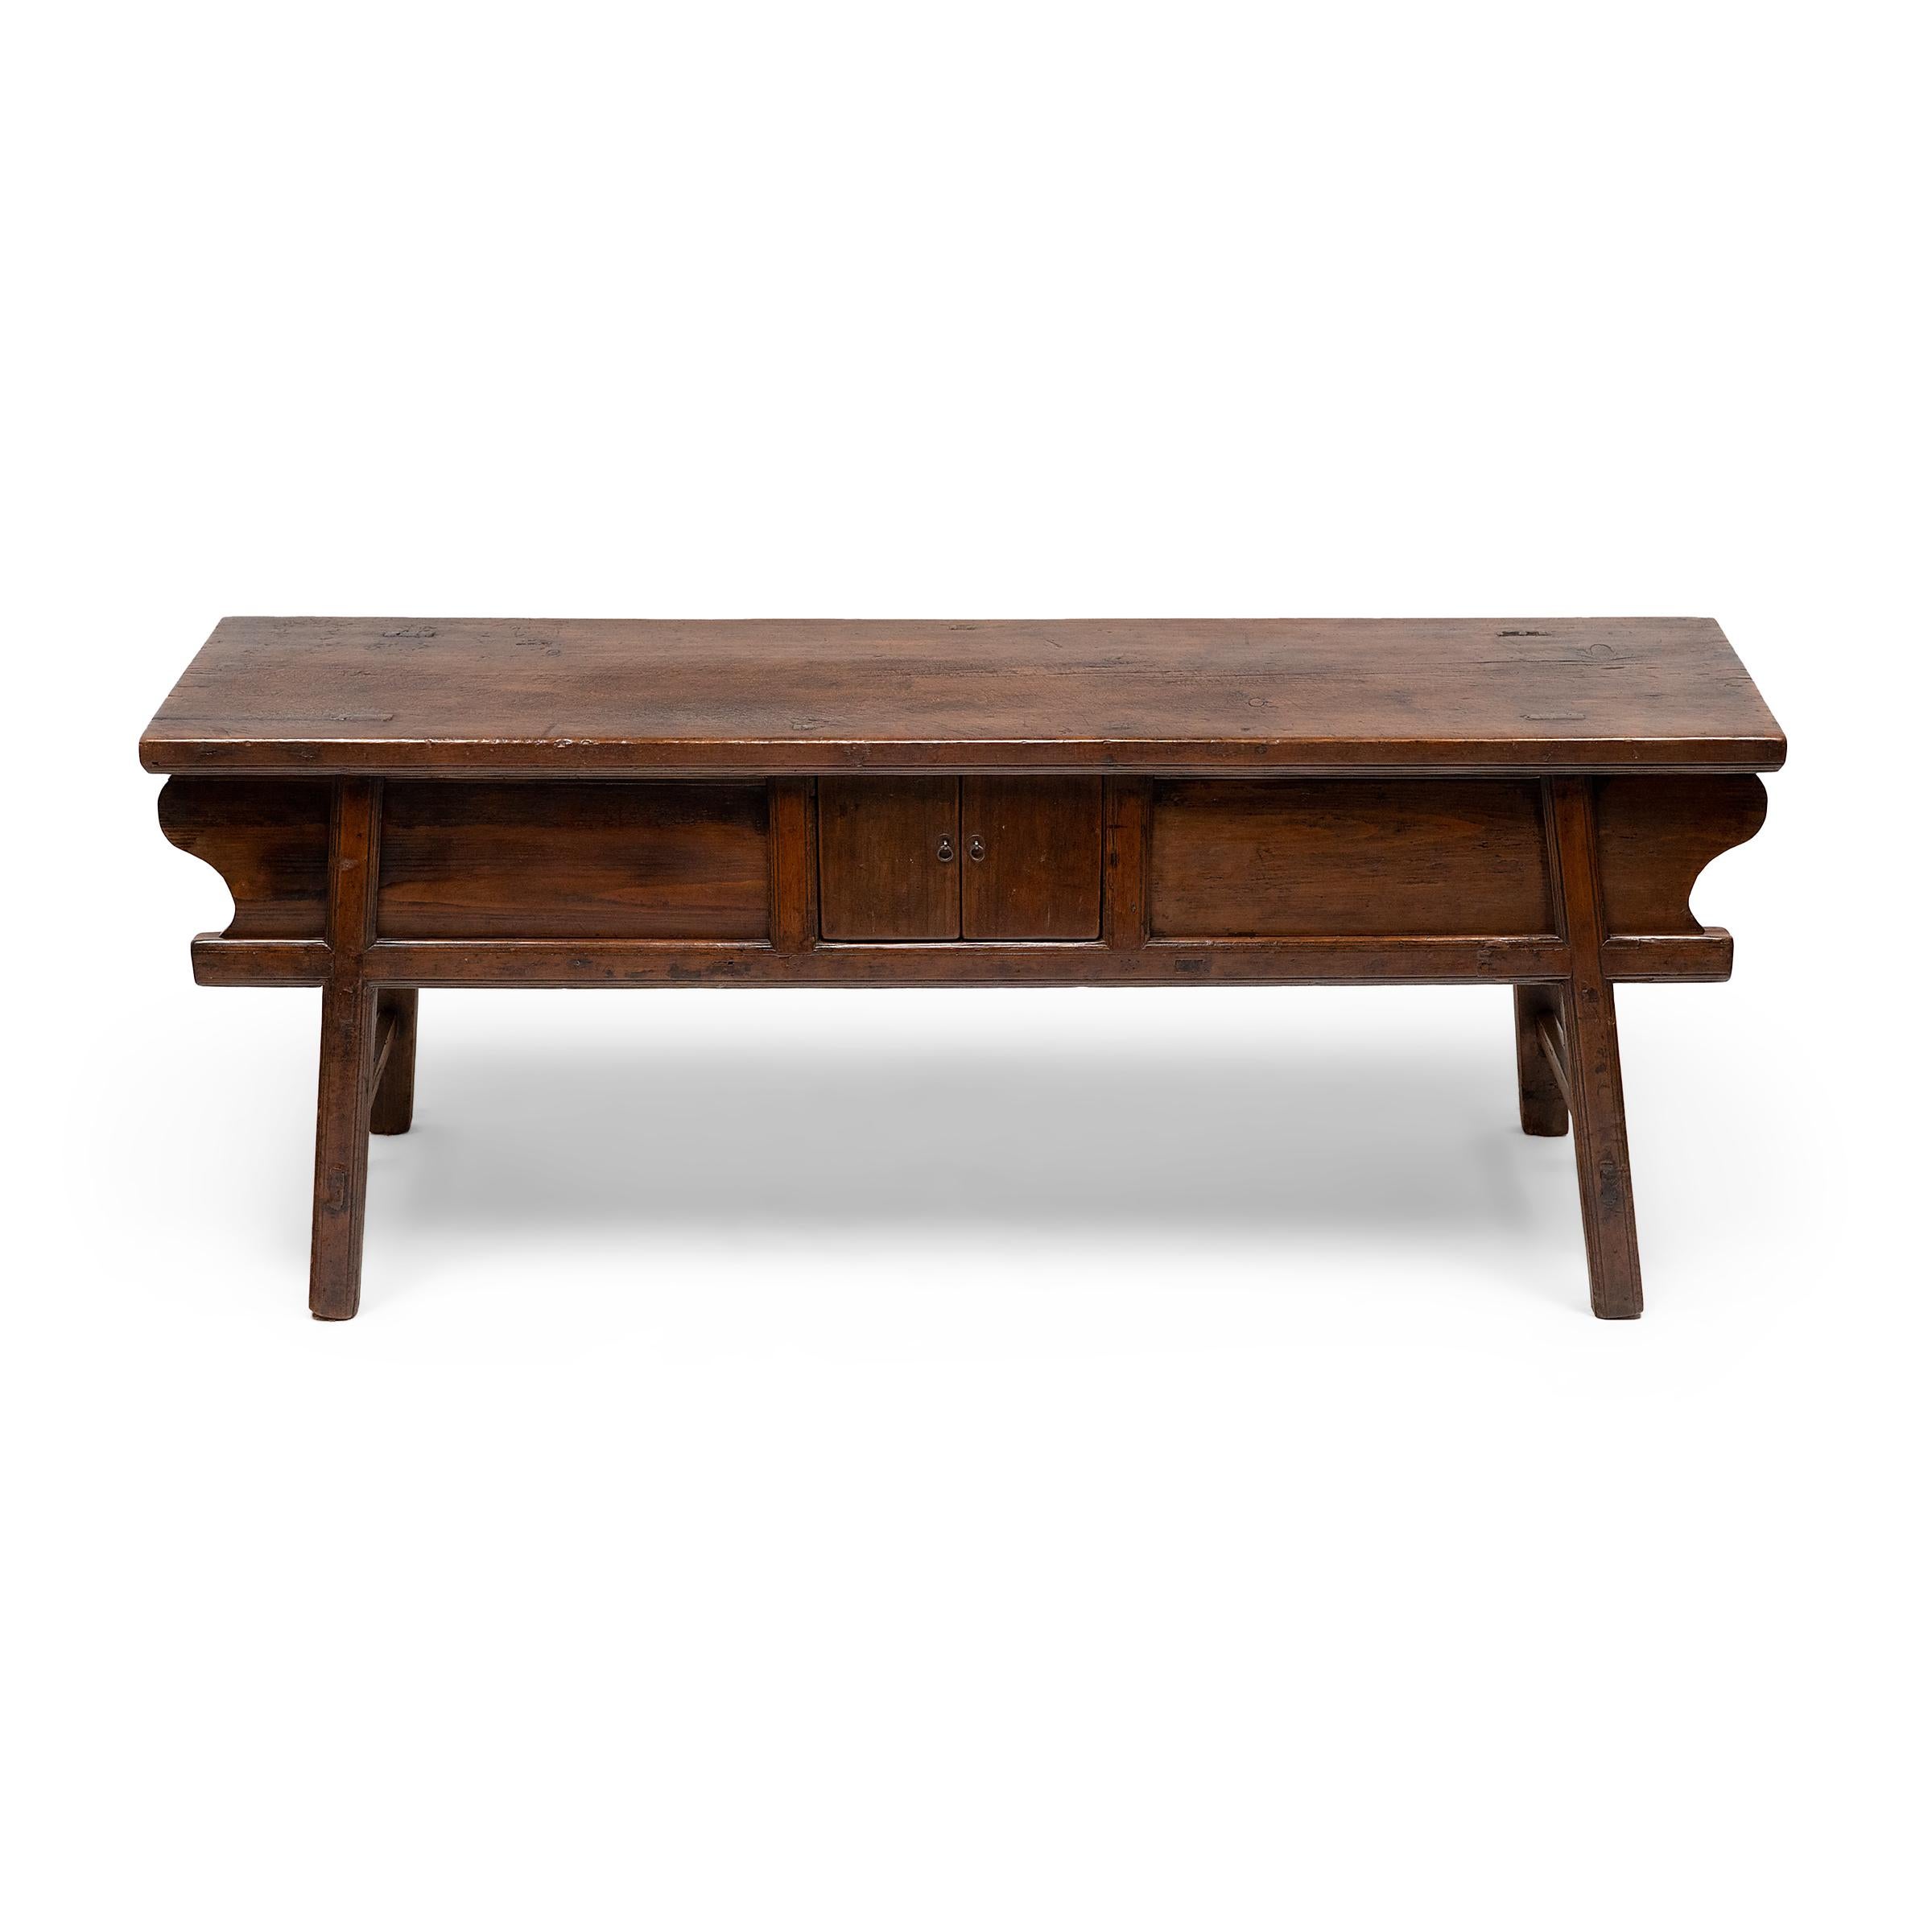 20th Century Provincial Chinese Dongbei Coffer Table, c. 1900 For Sale